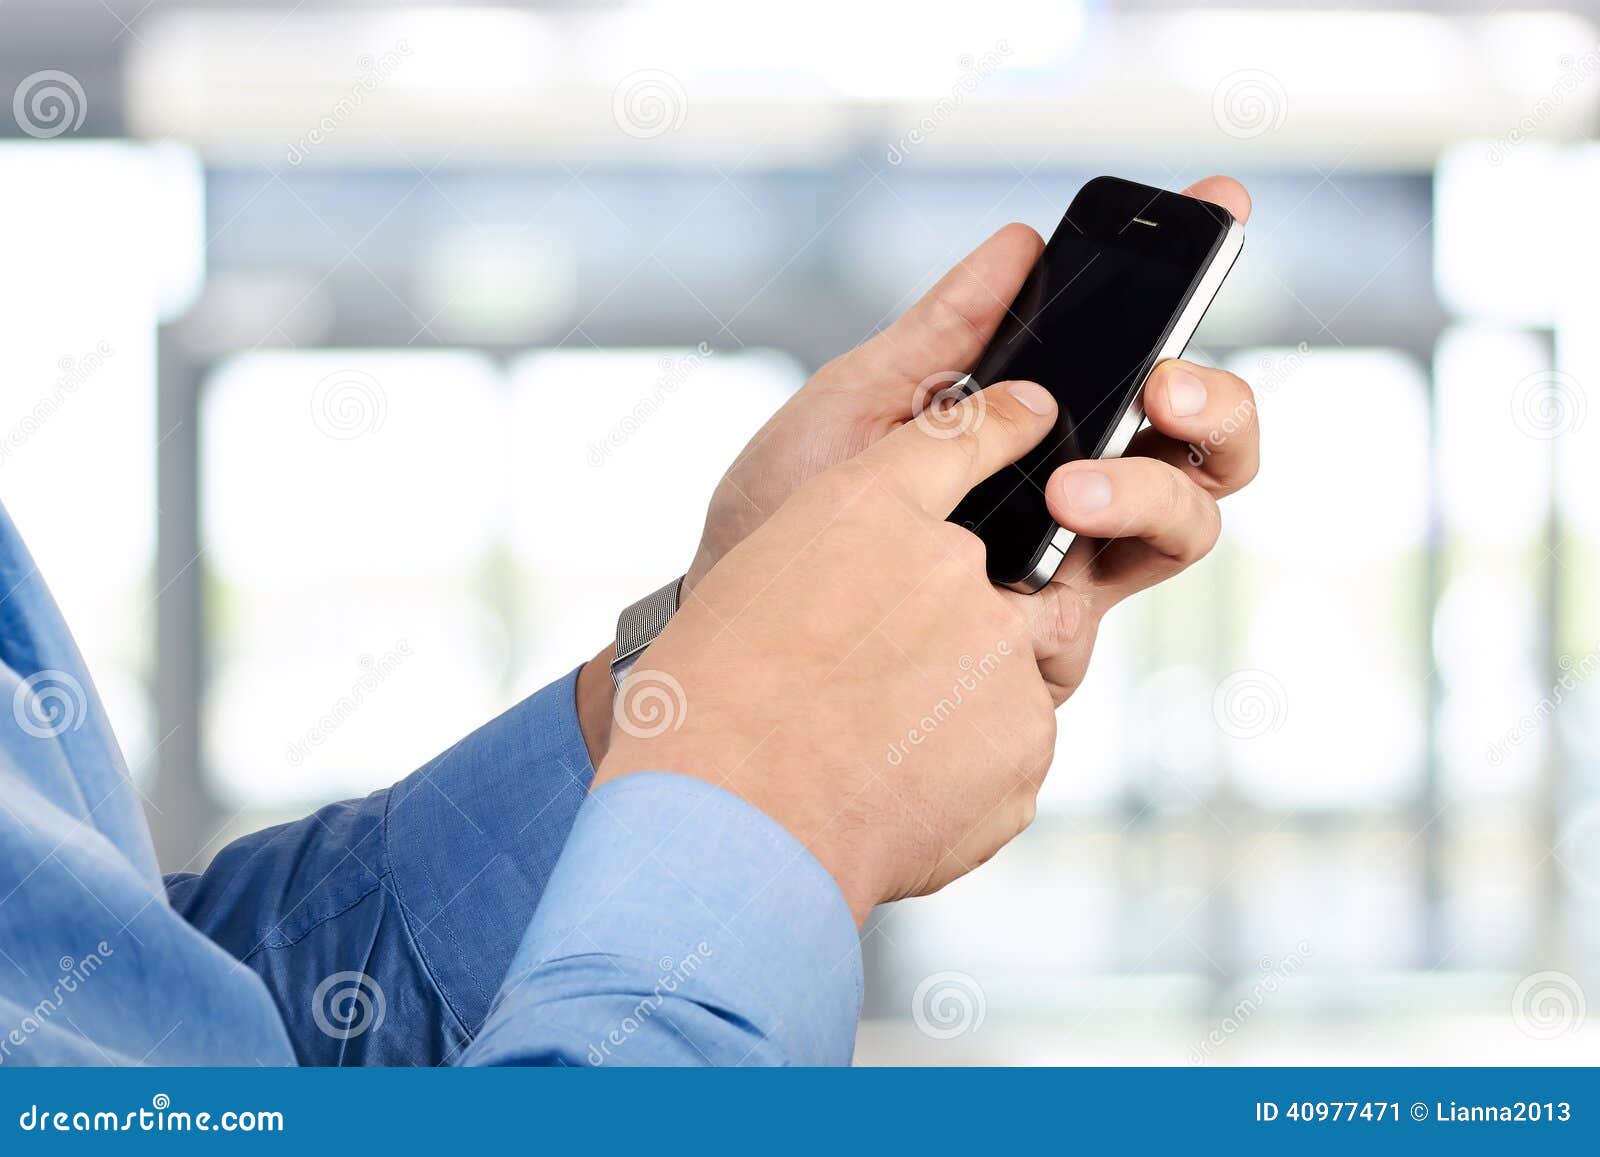 Businessman Holding the Mobile Smart Phone Stock Image - Image of ...